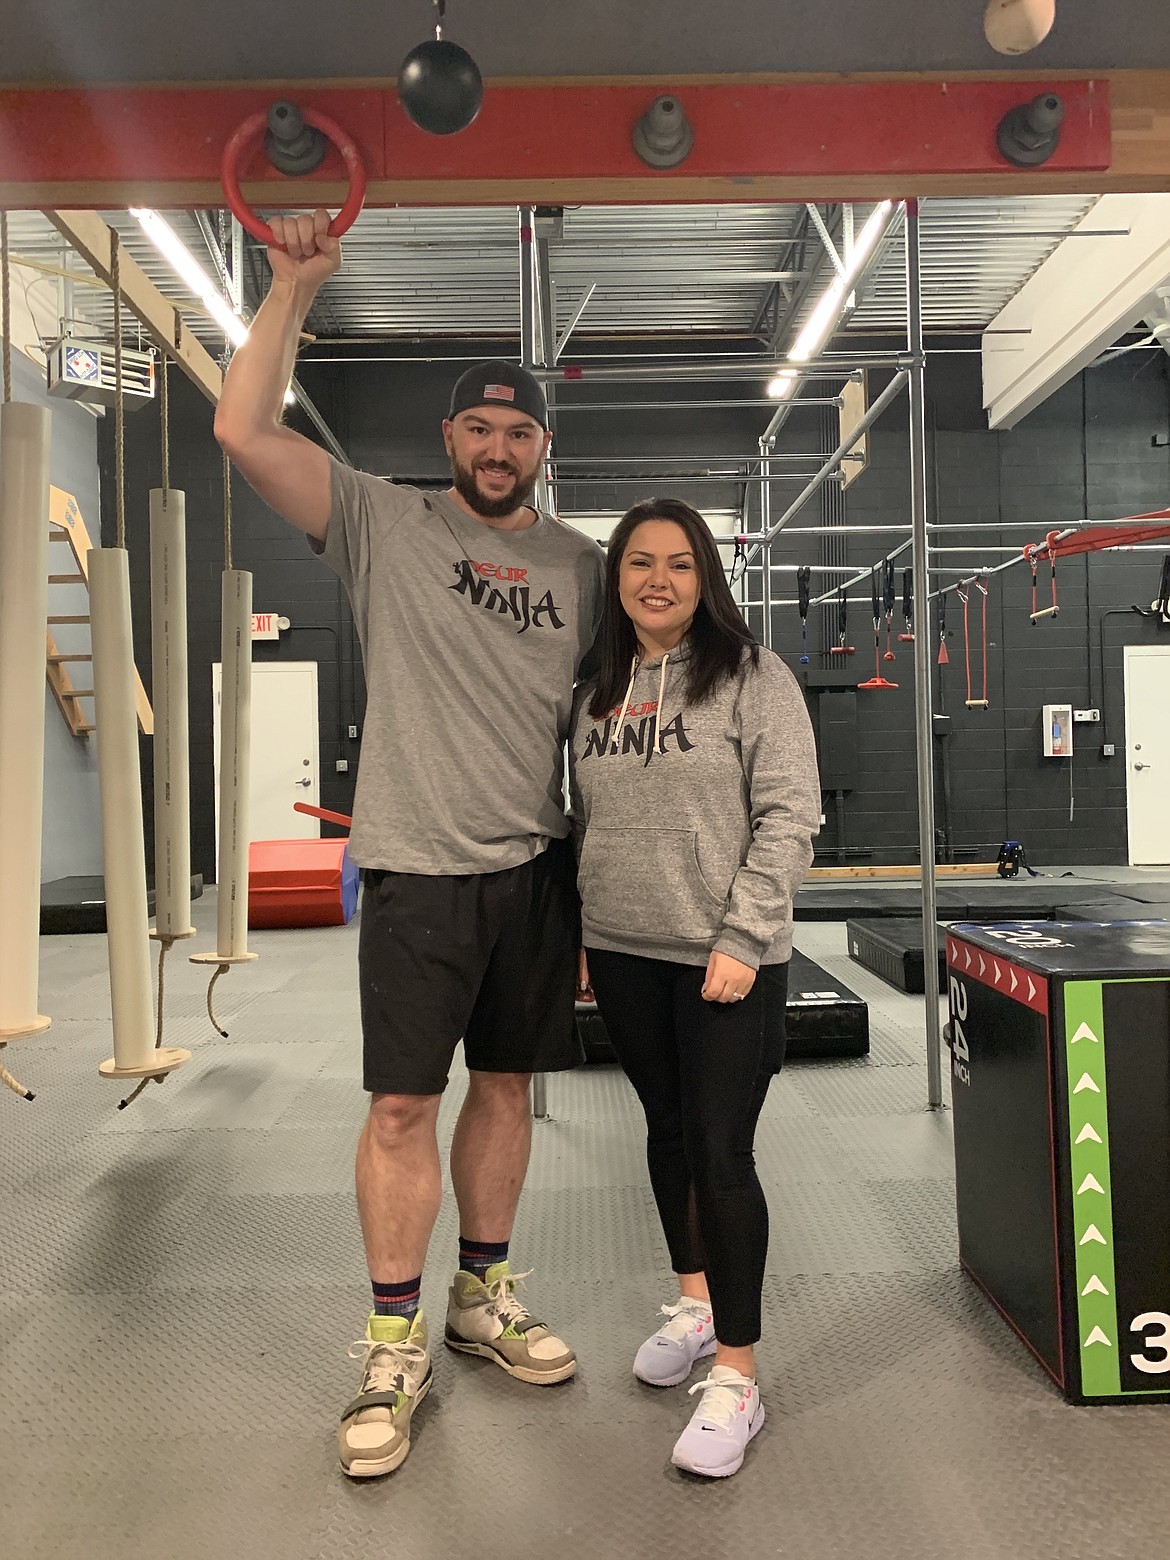 Courtesy photo
Arthur Elwell and Terissa Elwell, owners/ certified ninja coaches at Coeur Ninja, now open at 3848 N. Schreiber Way.